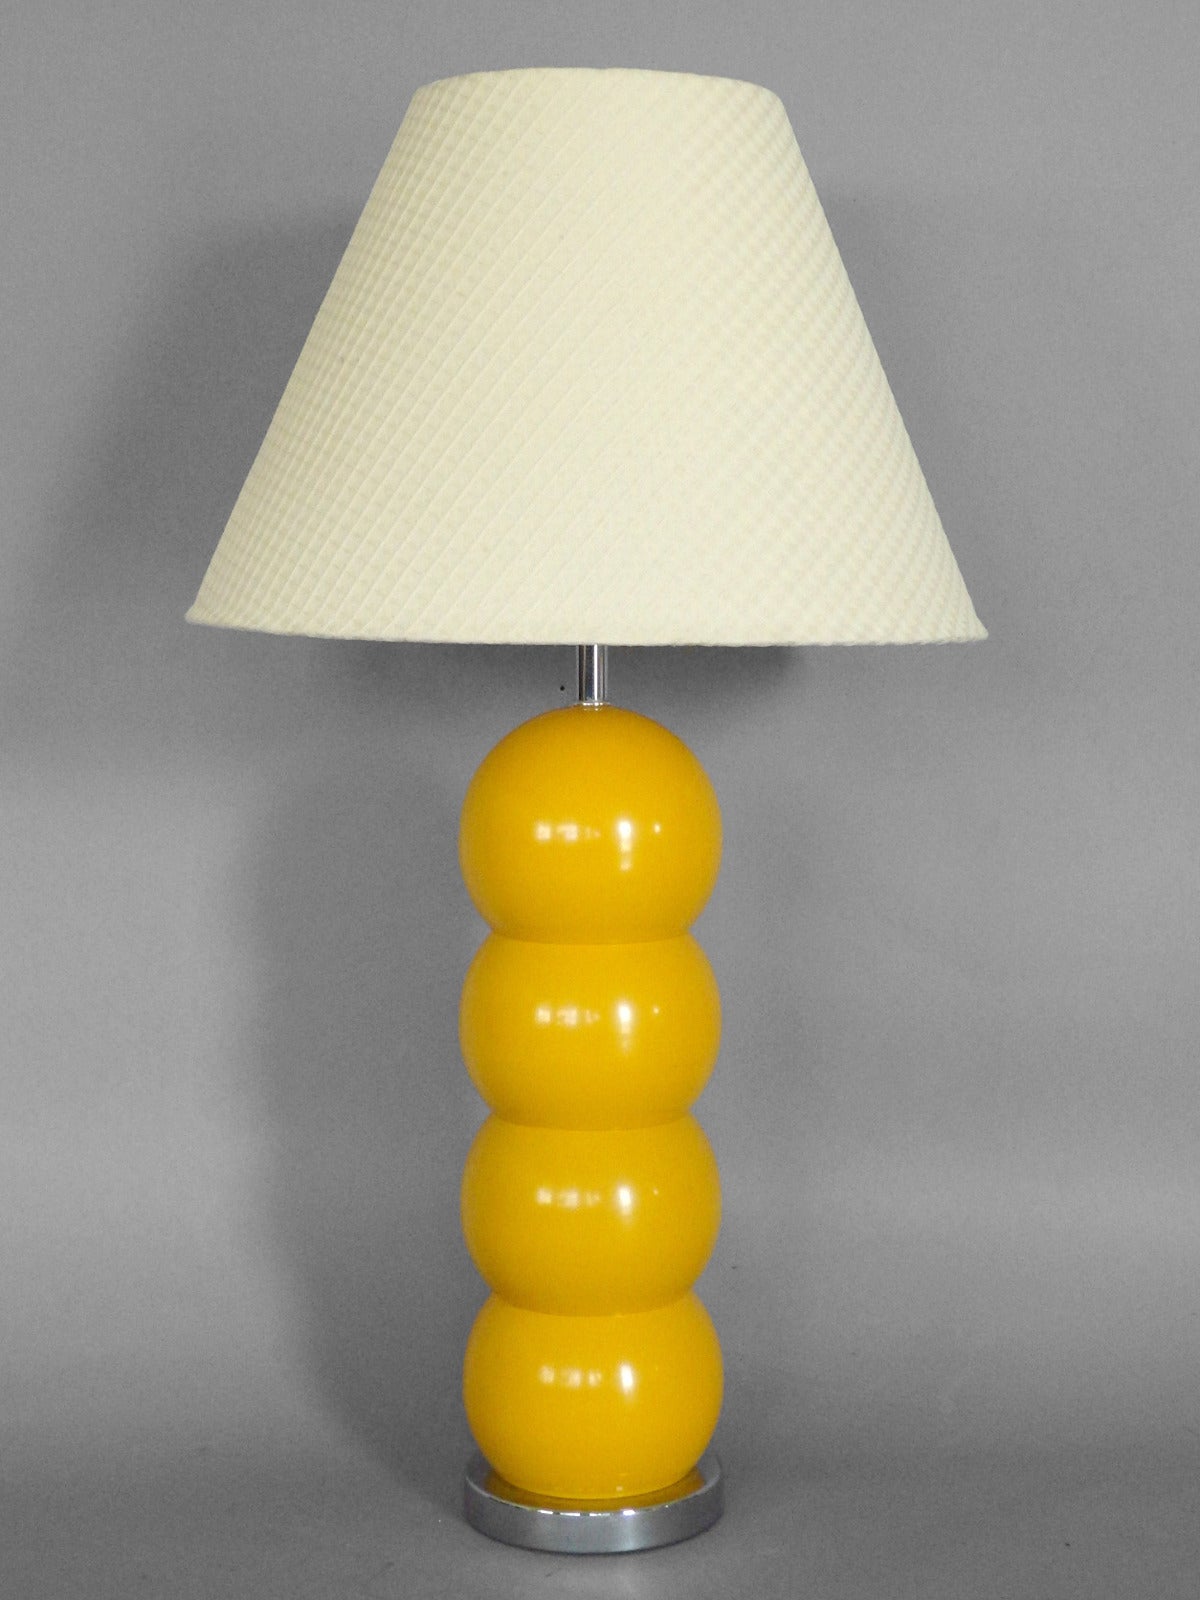 American Pair of Op-Pop Mod Yellow Ball Table Lamps by George Kovacs